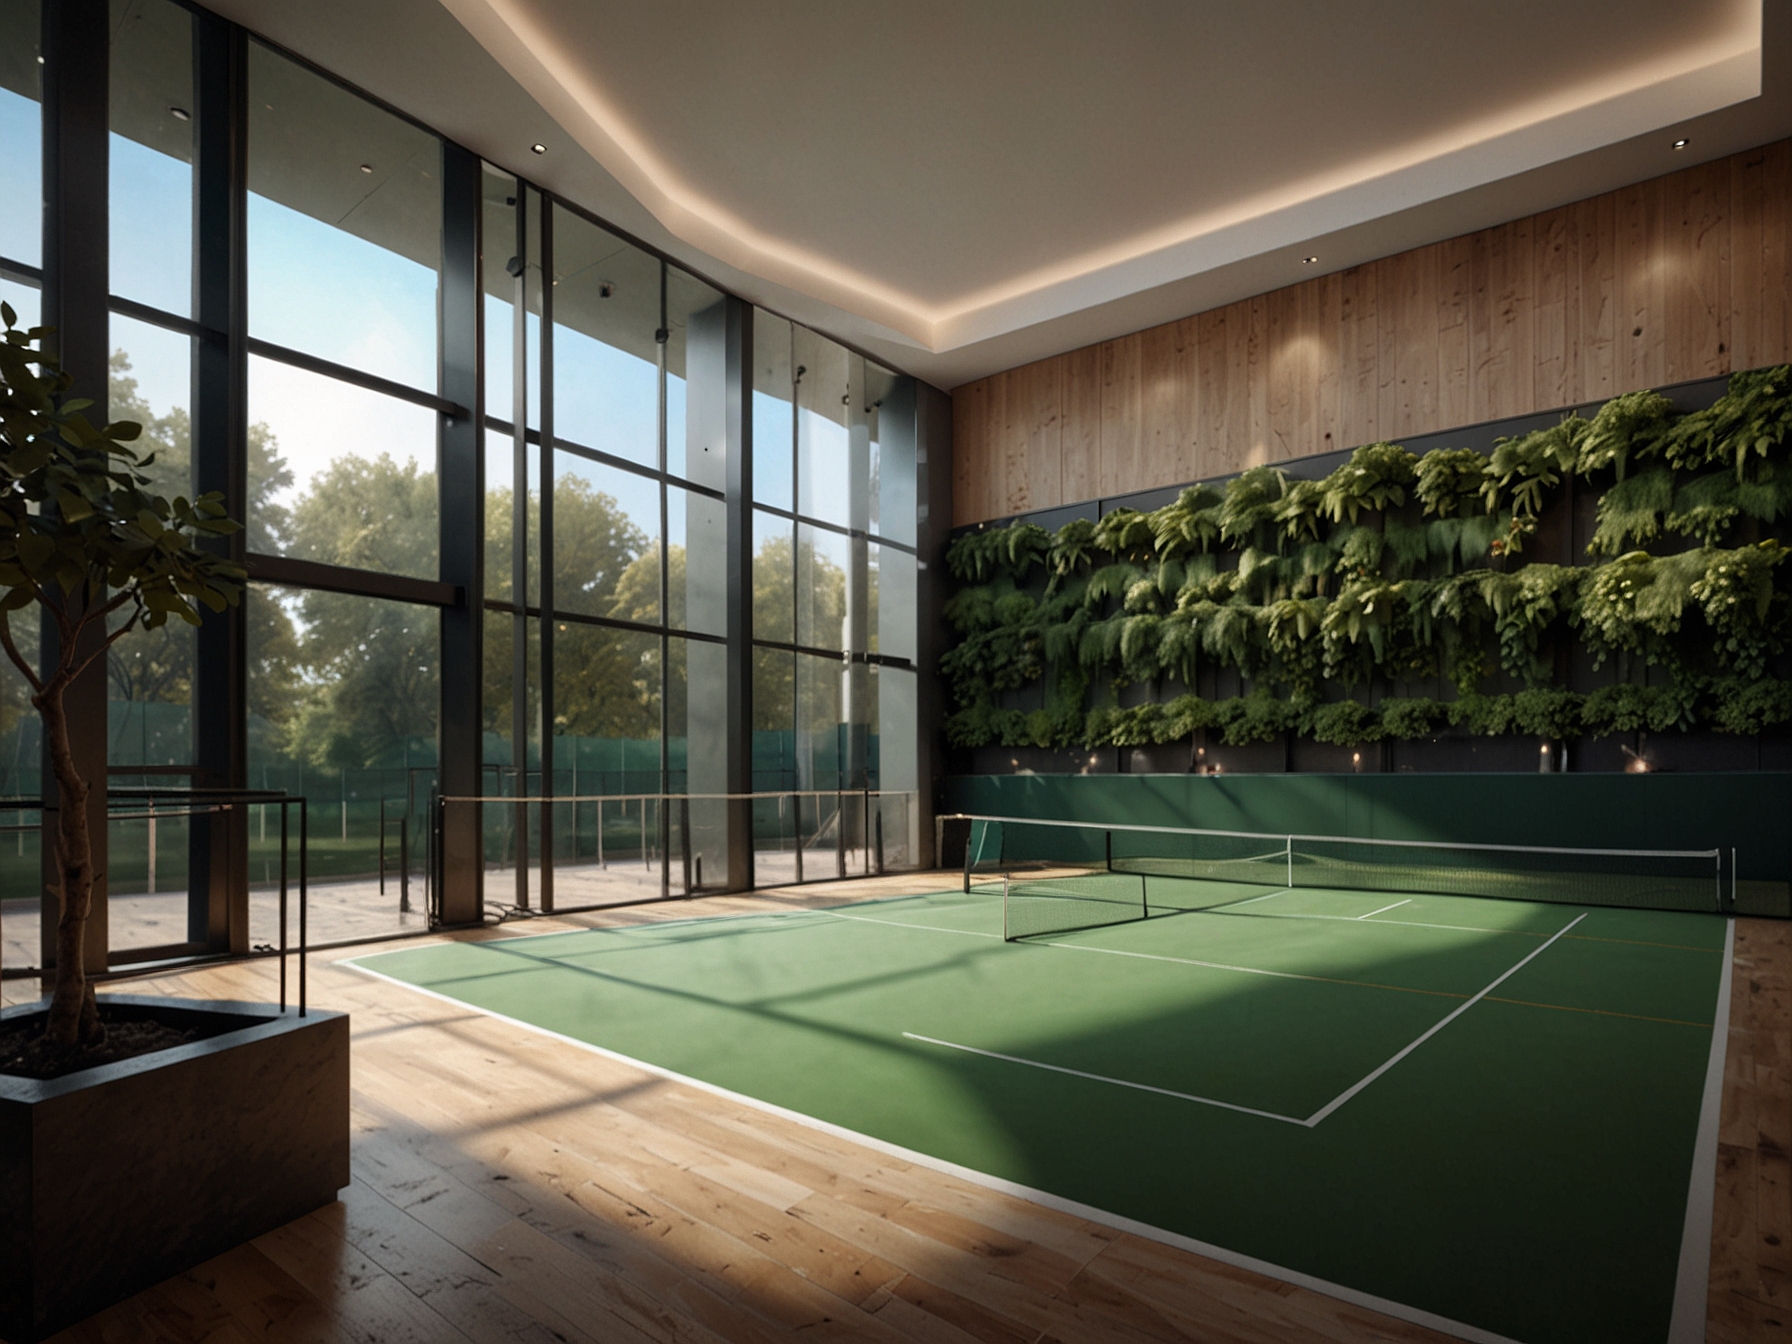 A stunning view of 9 Mulberry Square's gigantic indoor tennis court, boasting pristine playing surfaces and state-of-the-art lighting, providing residents a year-round tennis experience.